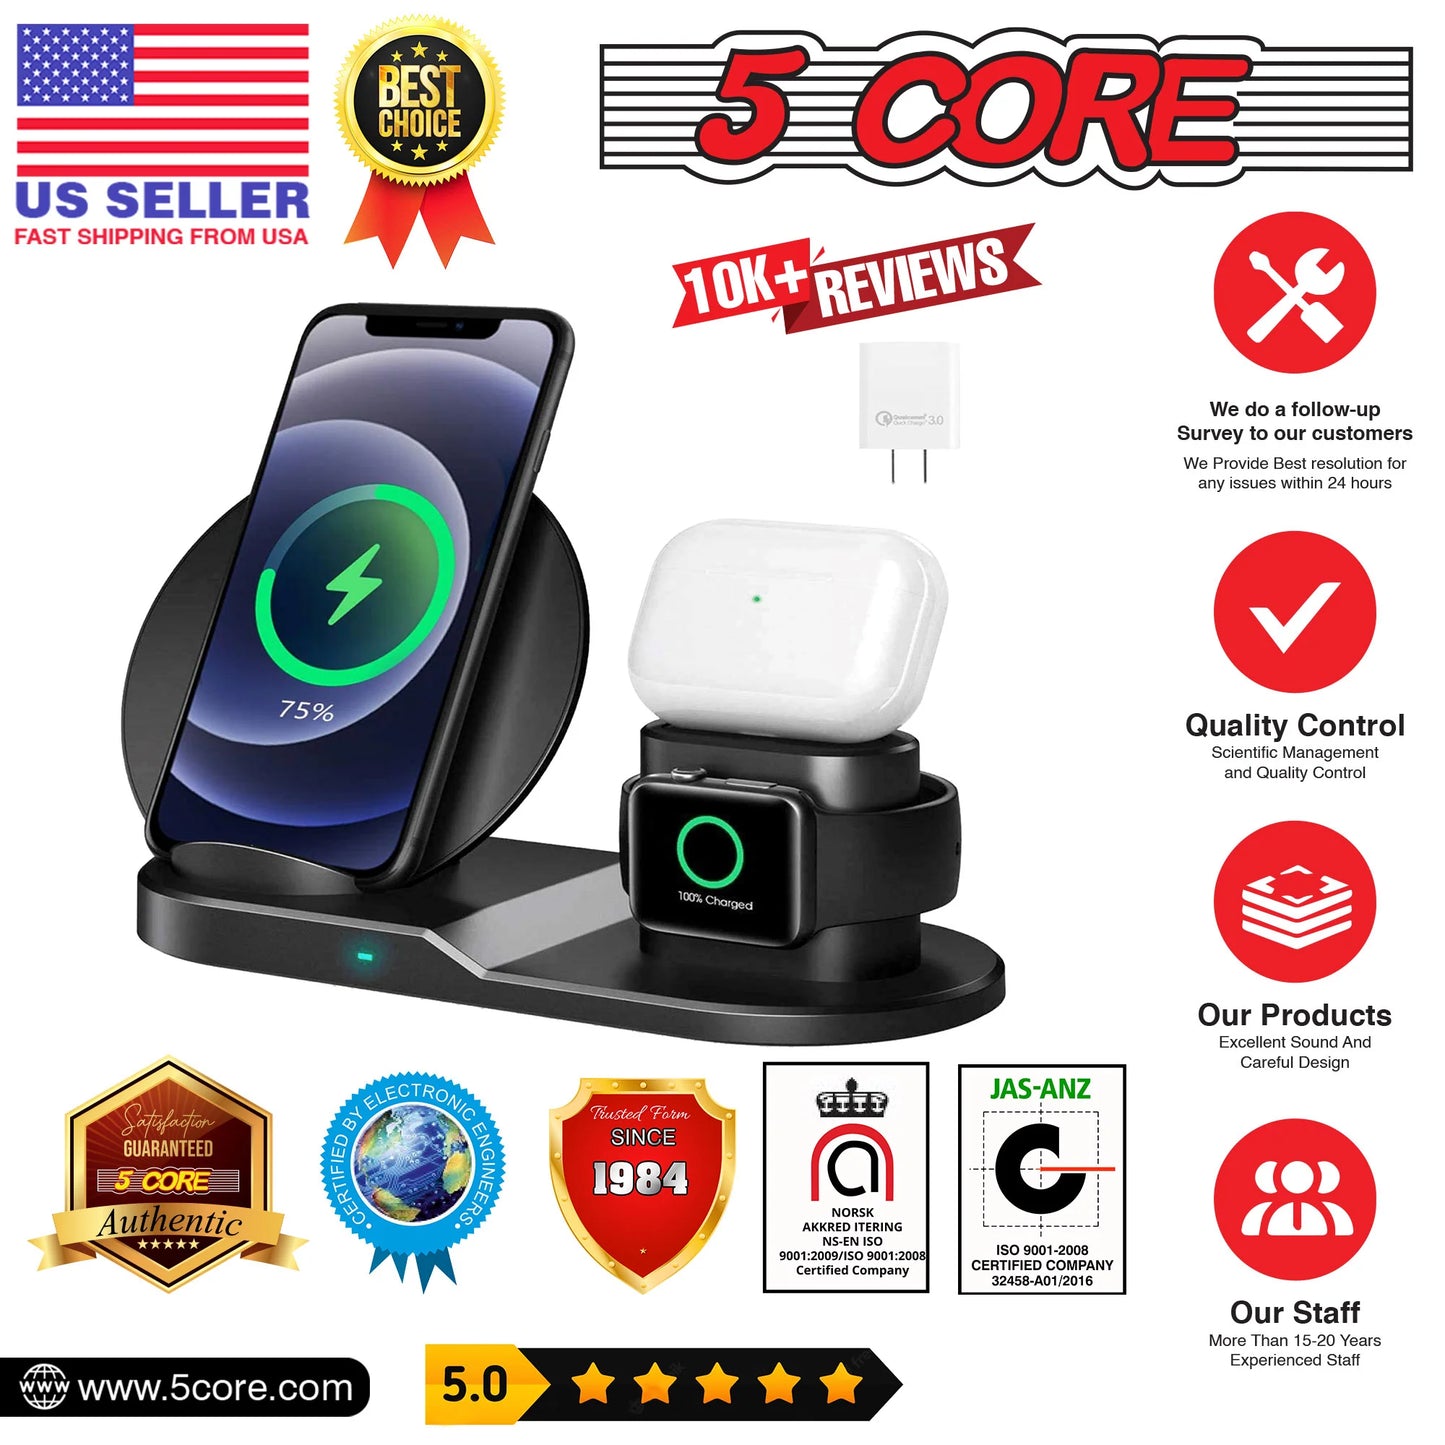 "5 Core 3-in-1 Wireless Charging Station with Dual Coil for Samsung, iPhone, Apple Watch, and AirPods - Fast Qi Wireless Charger Stand - Model WCR 3"